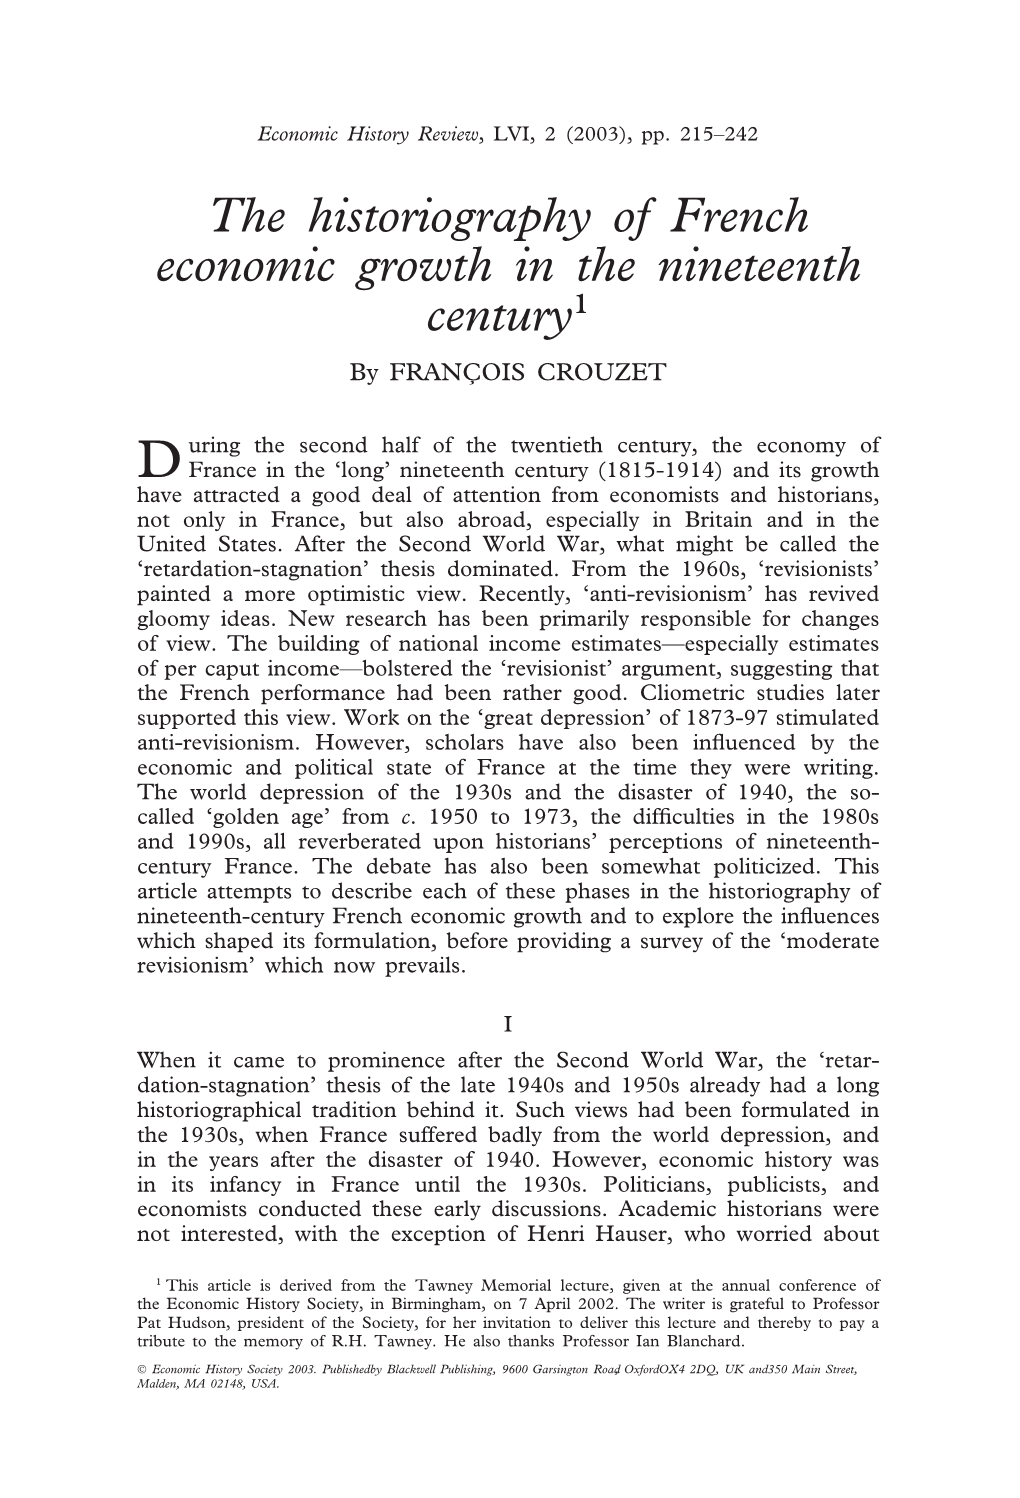 The Historiography of French Economic Growth in the Nineteenth Century1 by FRANC¸ OIS CROUZET